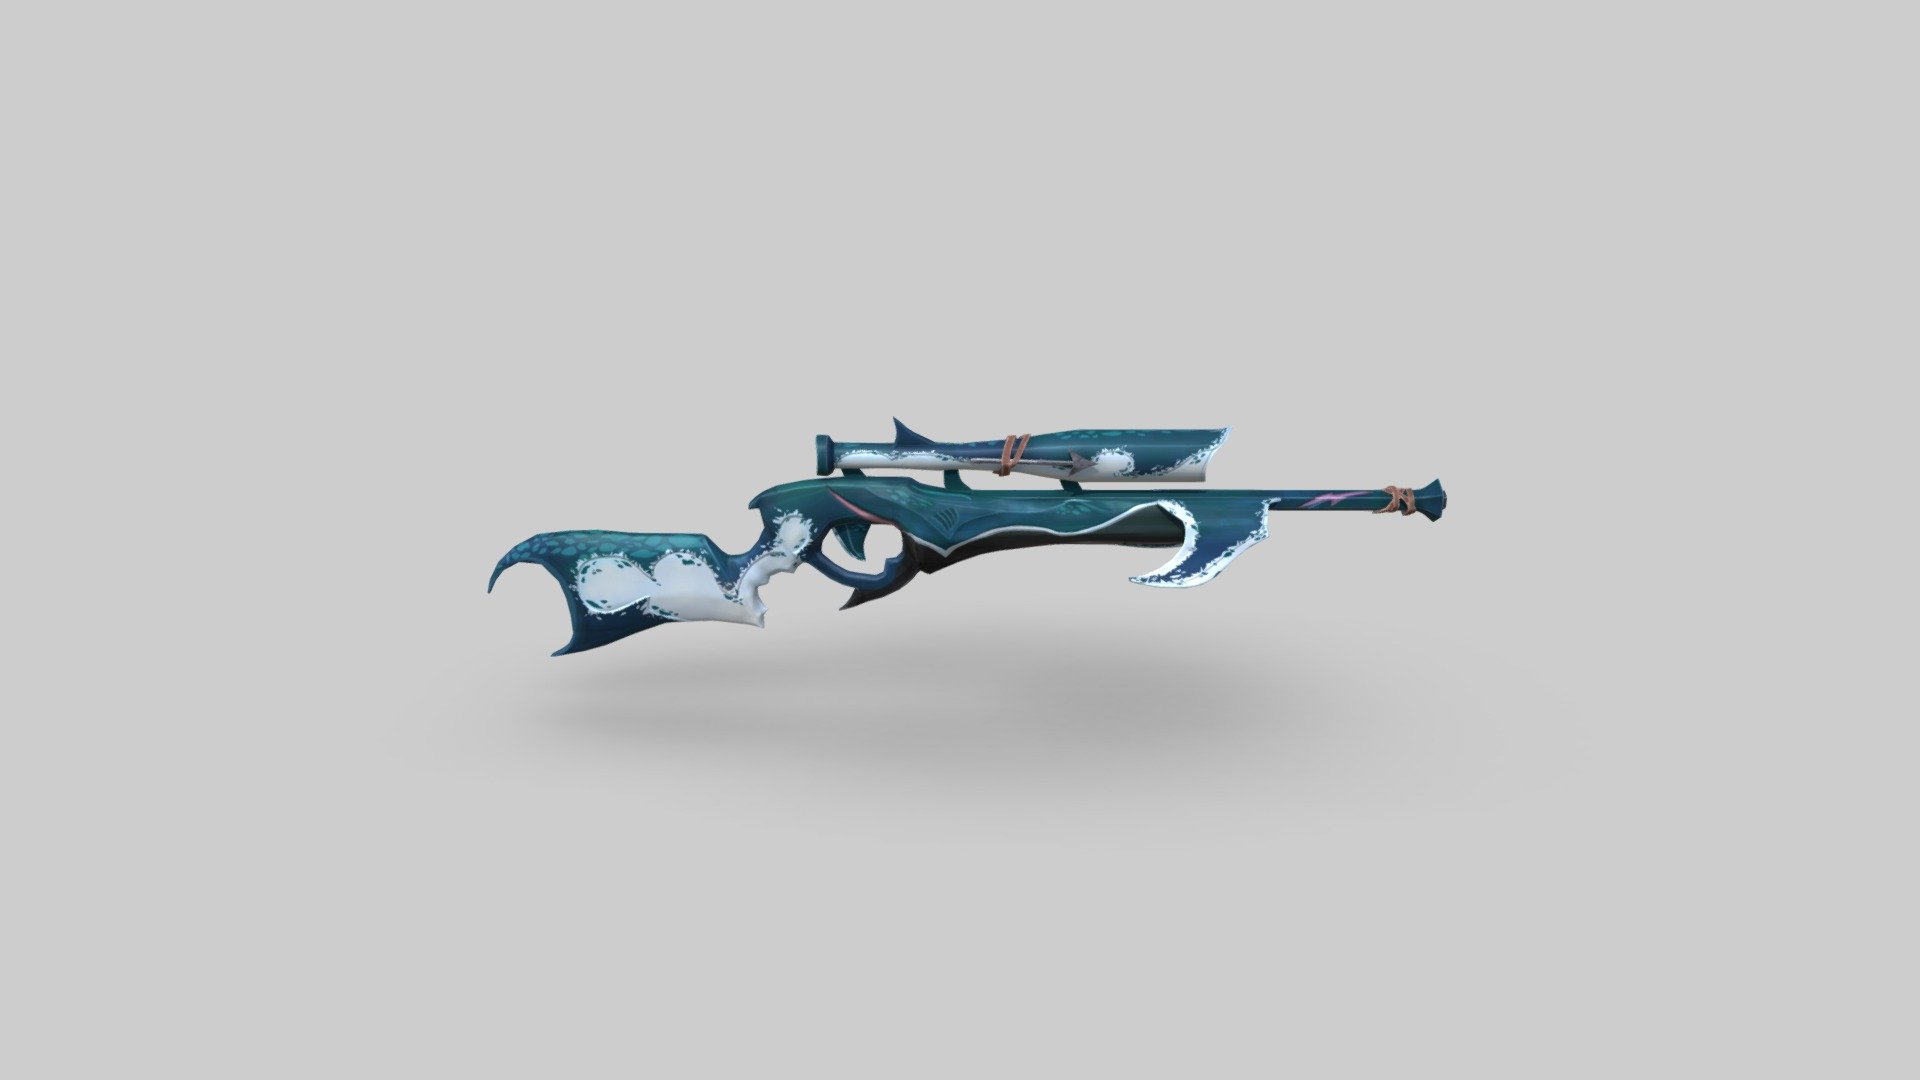 Shark Hunter Eye of Reach from Sea of Thieves based off a concept by u/anamelikeunfound on Reddit who posted on the sea of thieves reddit page which can be found here: https://www.reddit.com/r/Seaofthieves/comments/gjrpaz/drew_up_some_shark_hunter_weapons/

modified to add my own liking - Shark hunter Eye of reach - 3D model by Zombuddie 3d model